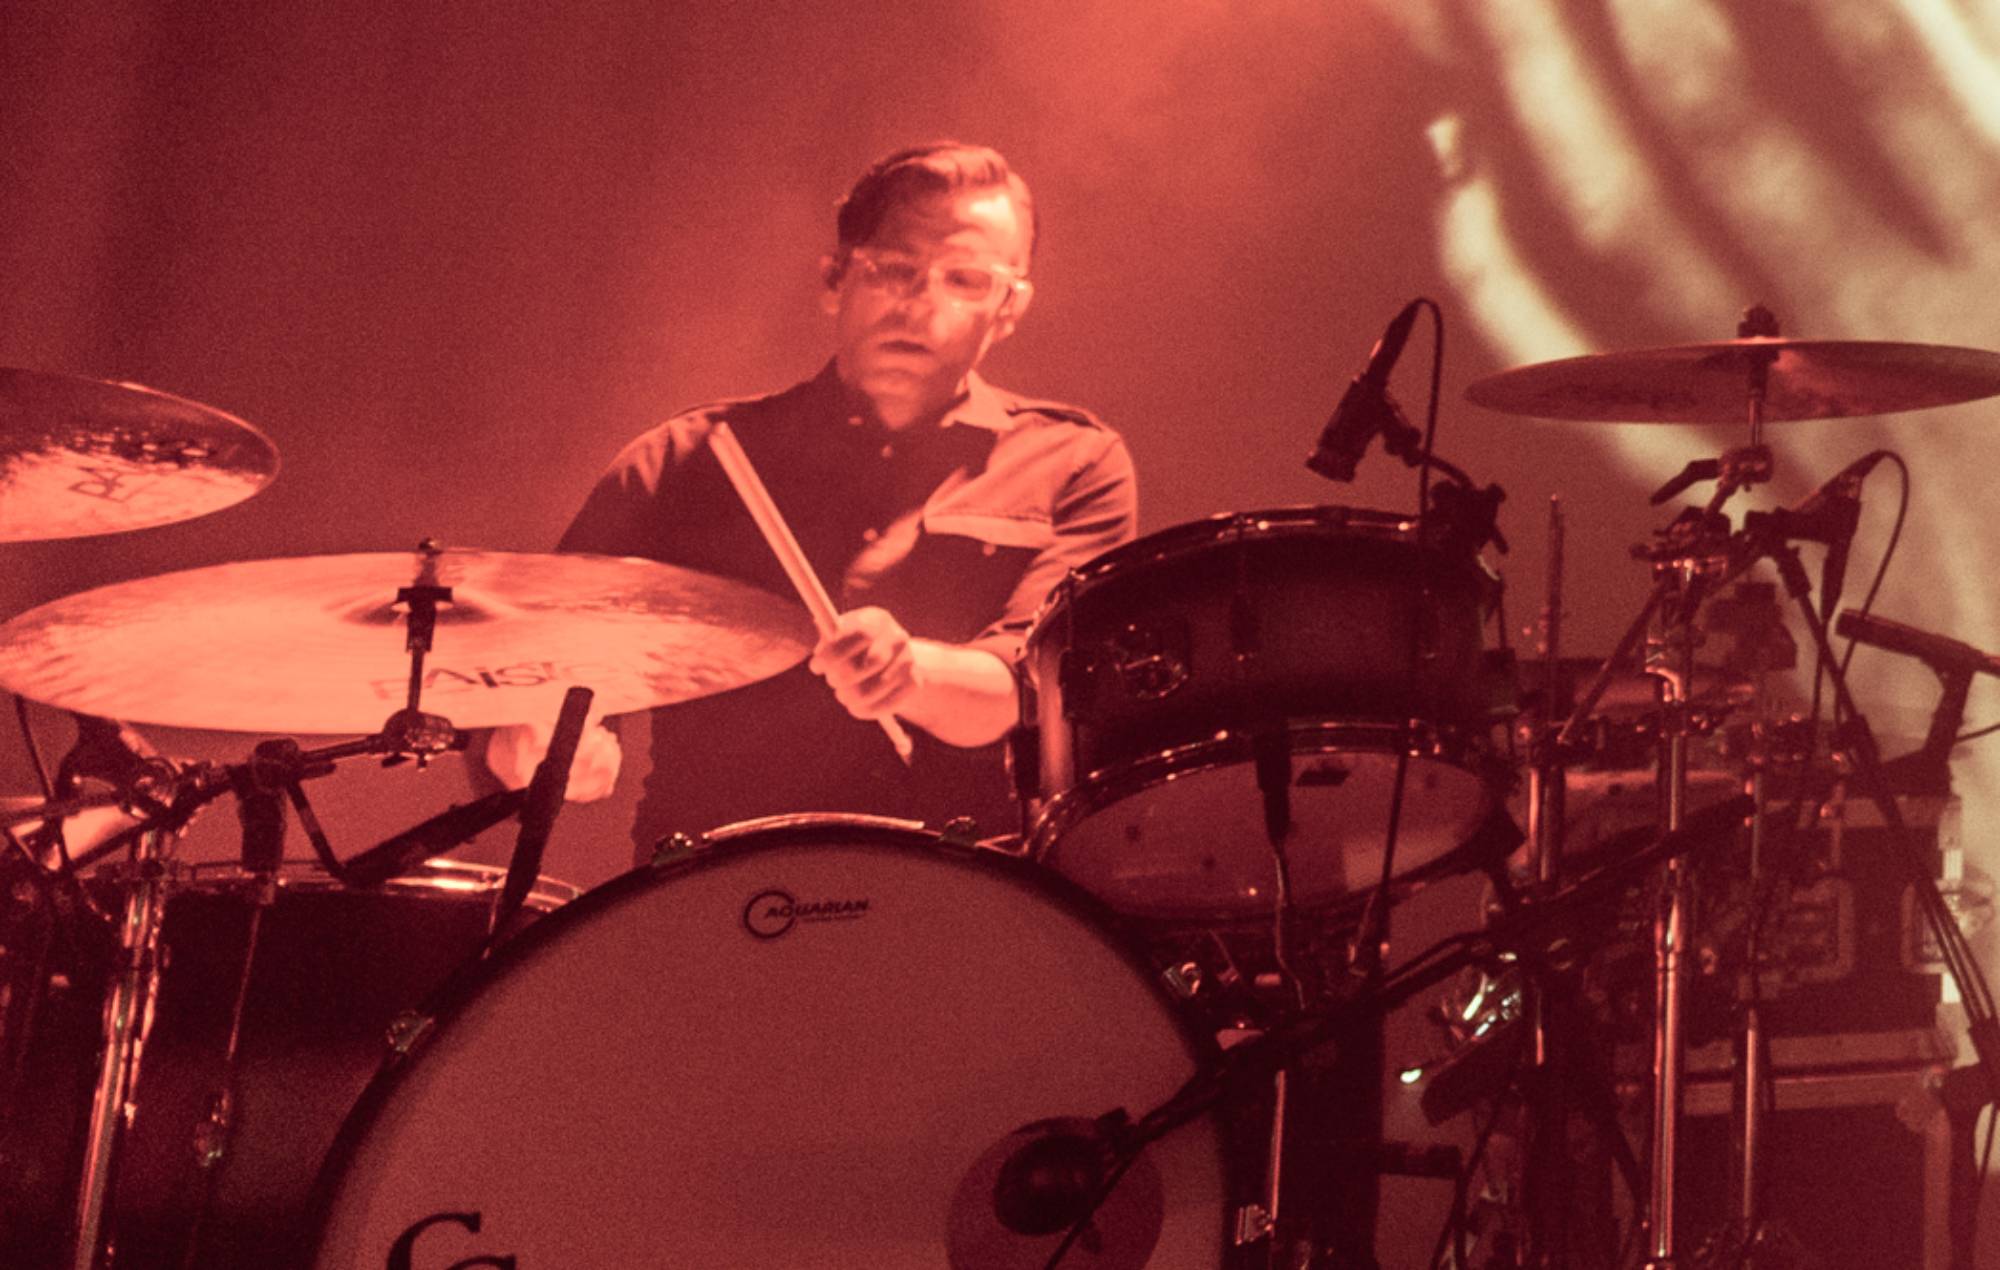 Interpol drummer Sam Fogarino to “stay off the road for the time being”